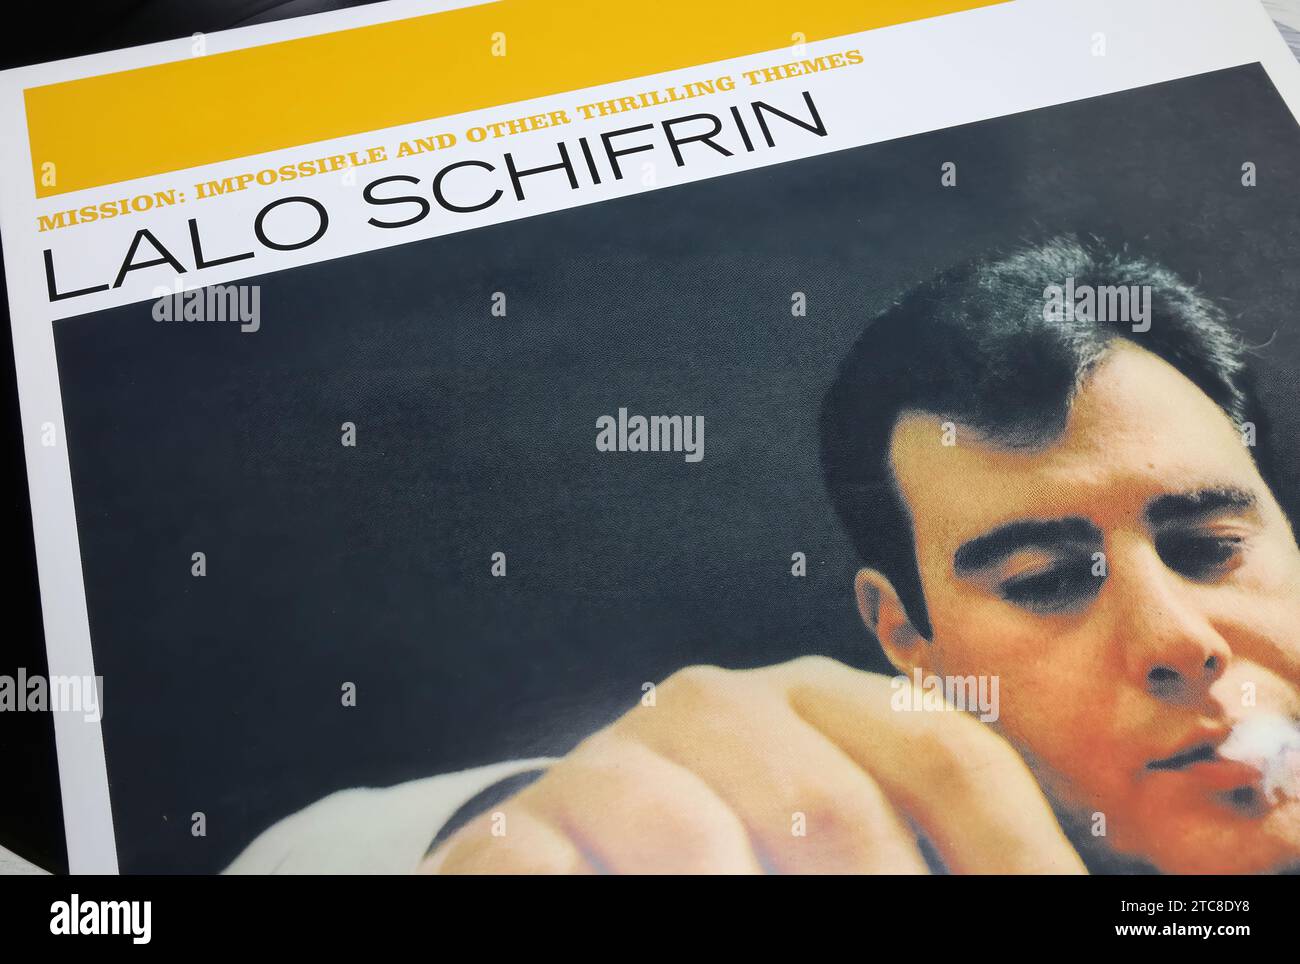 Viersen, Germany - May 9. 2023: Closeup of vinyl record album of Lalo Schifrin with collection of famous film scores Stock Photo